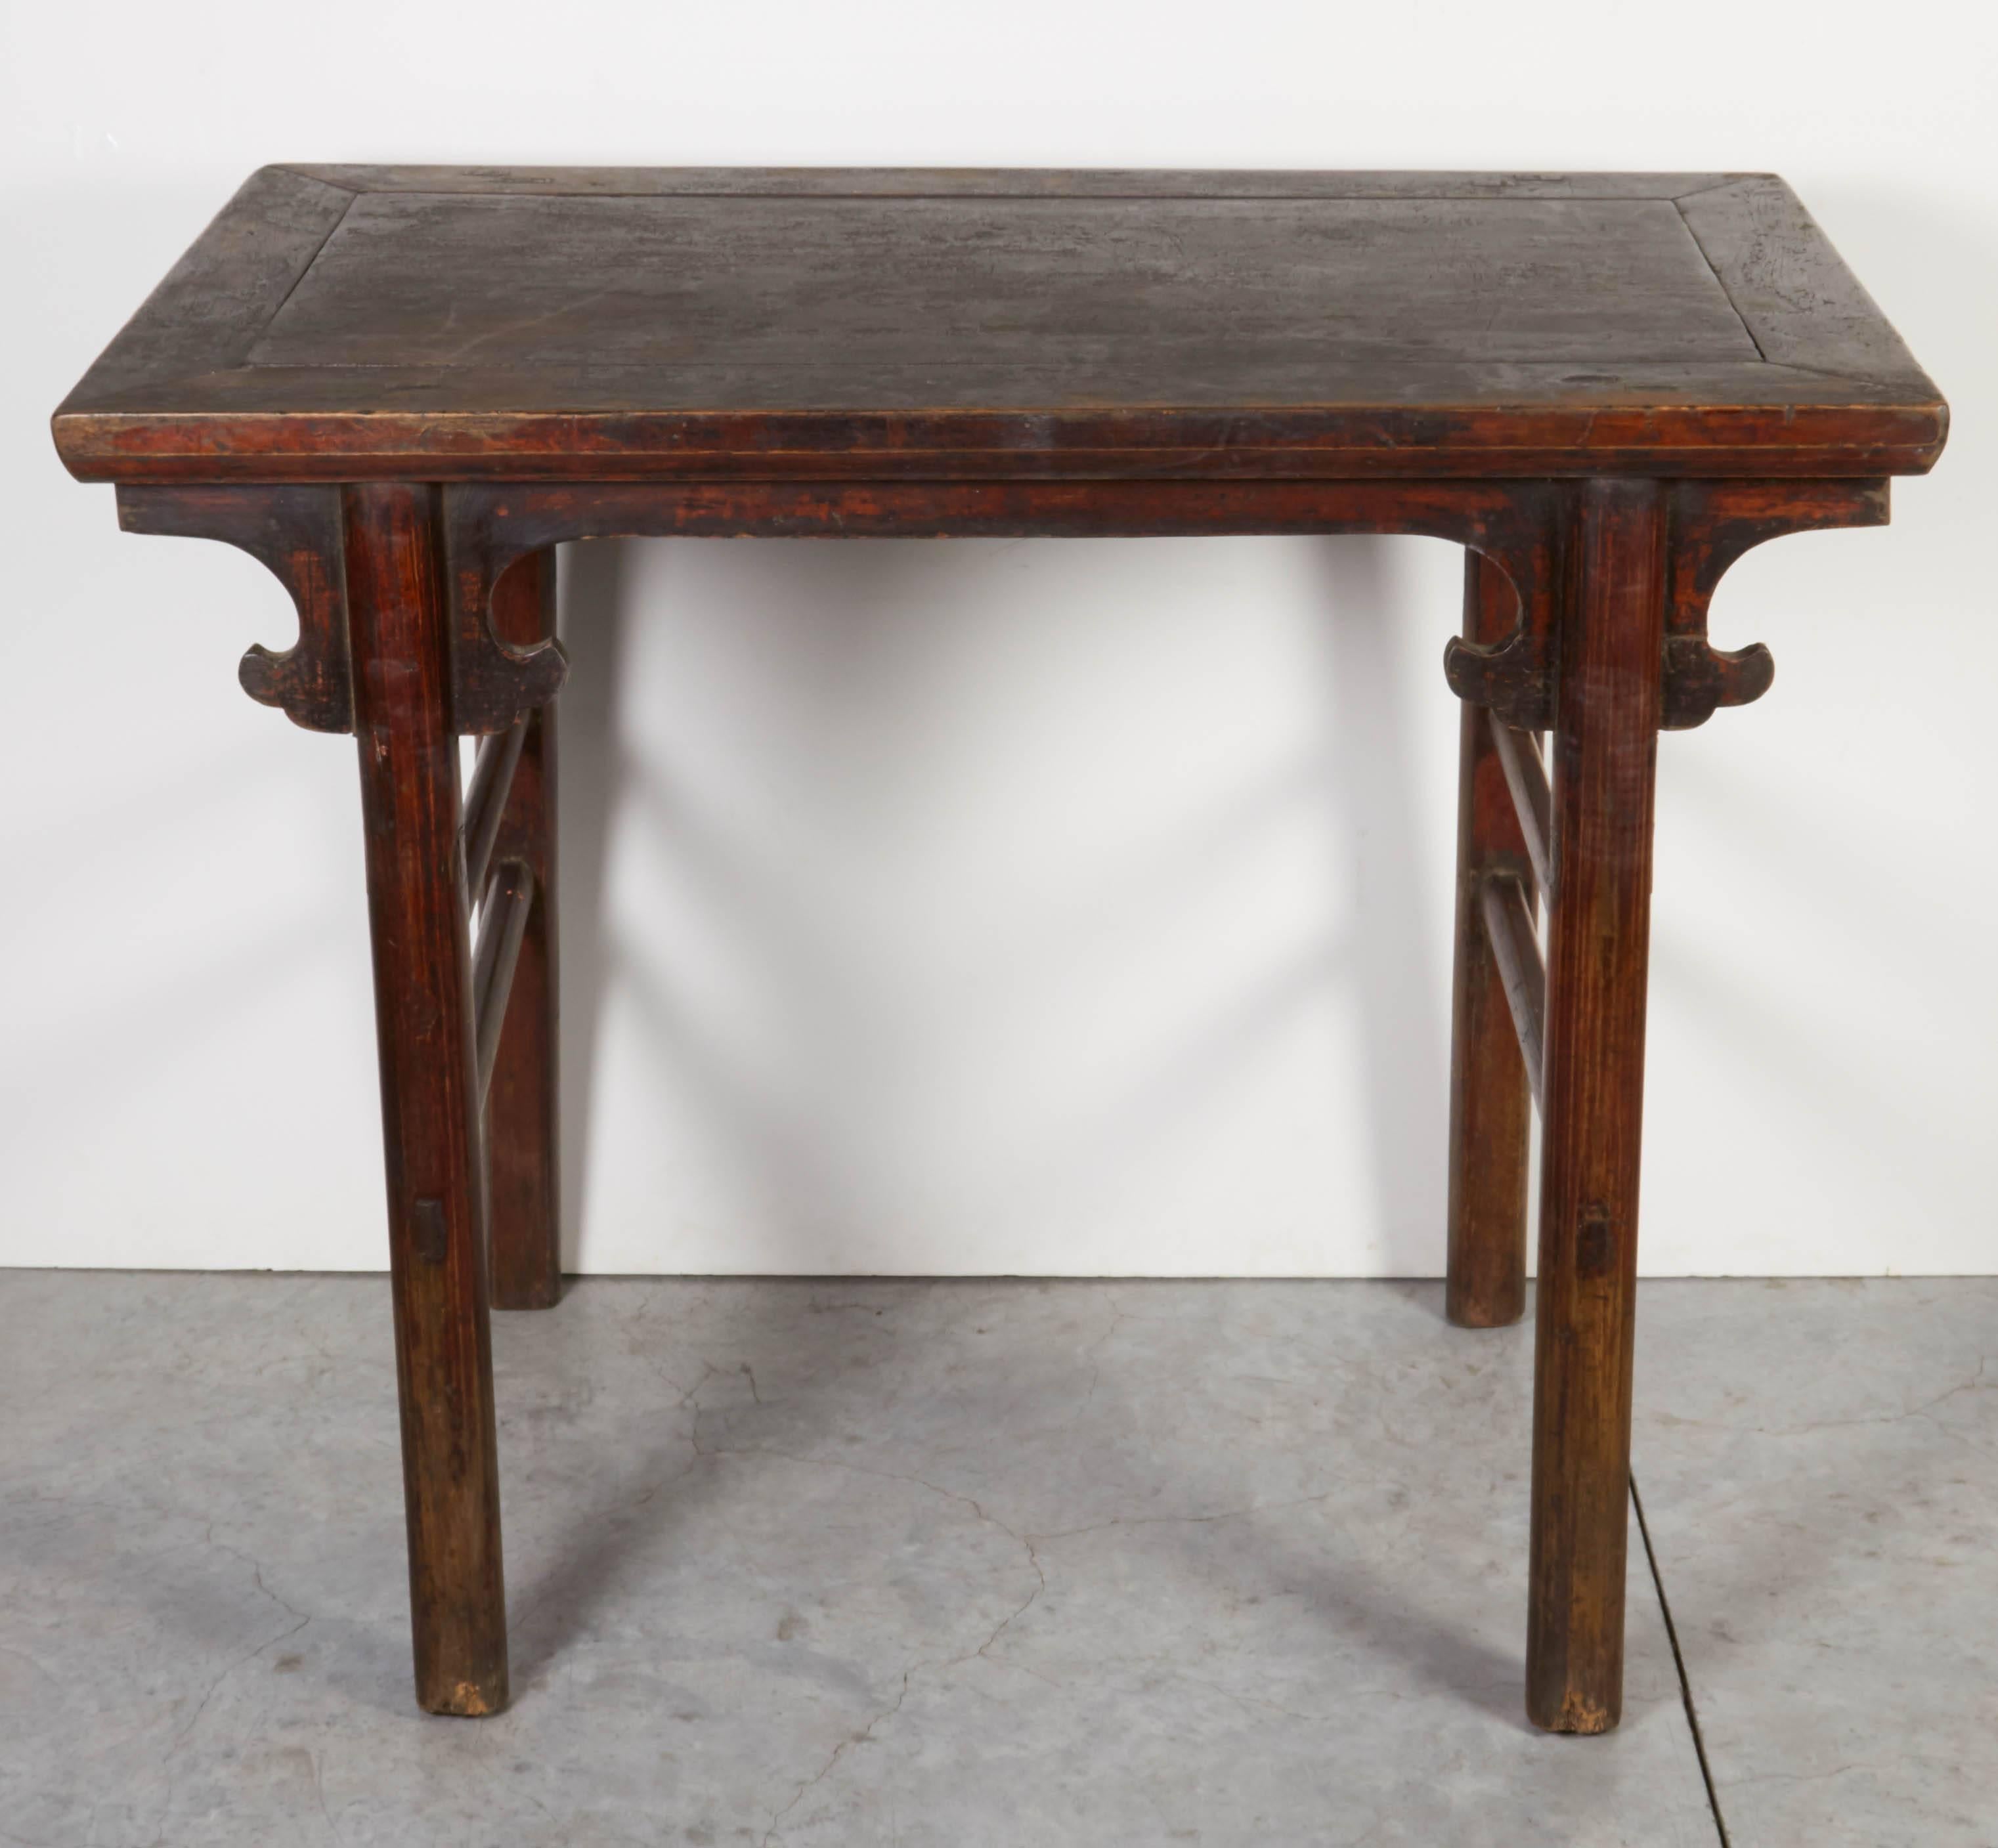 A simple, Ming stye 19th century, Chinese wine table with fabulous patina and beautiful details. The size of this wonderful table makes it ideal for use as a vanity or small work desk. From Shanxi Province. 

T579.